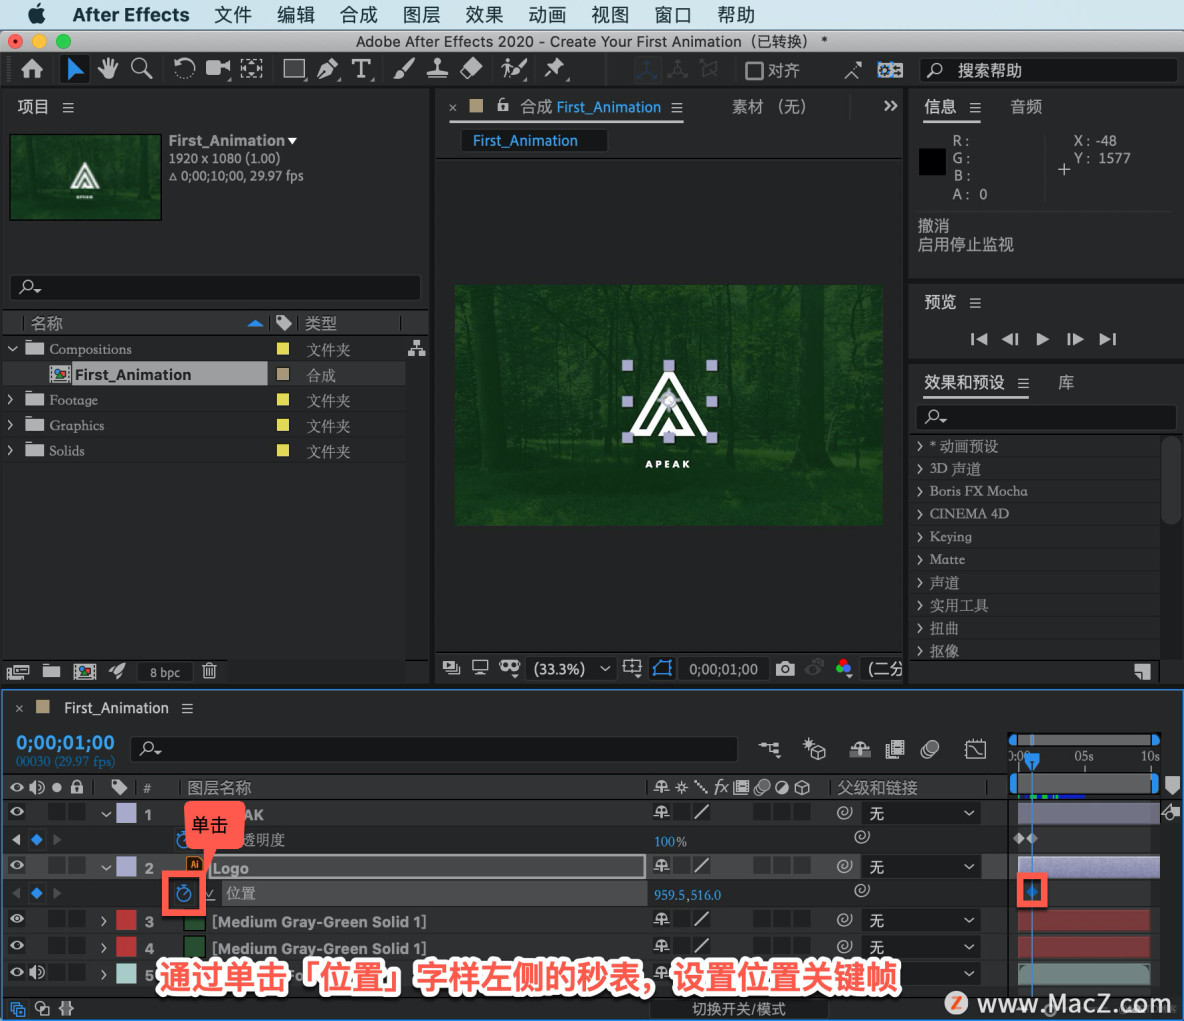 After Effects 教程，如何在 After Effects 中创建动画？_After Effects_03